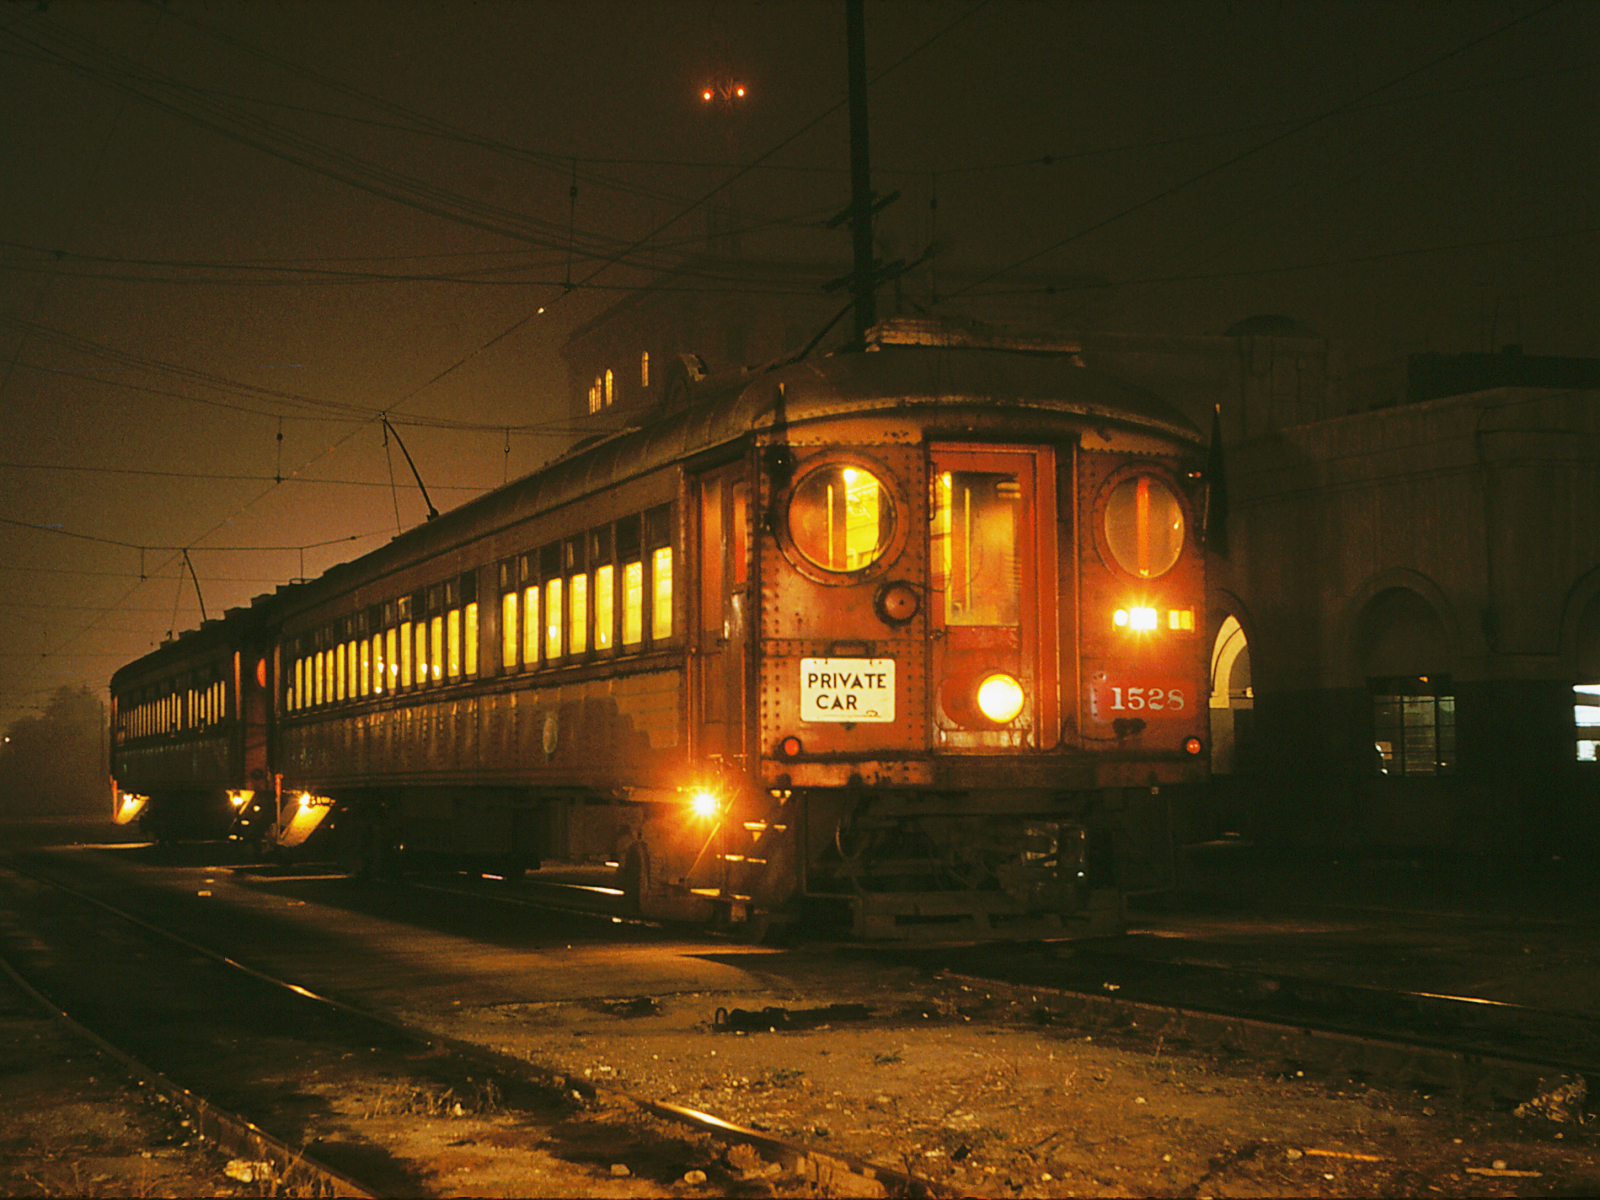 Pacific Electric Railway Car 1528 - photograph by Alan Weeks - December 8, 1958